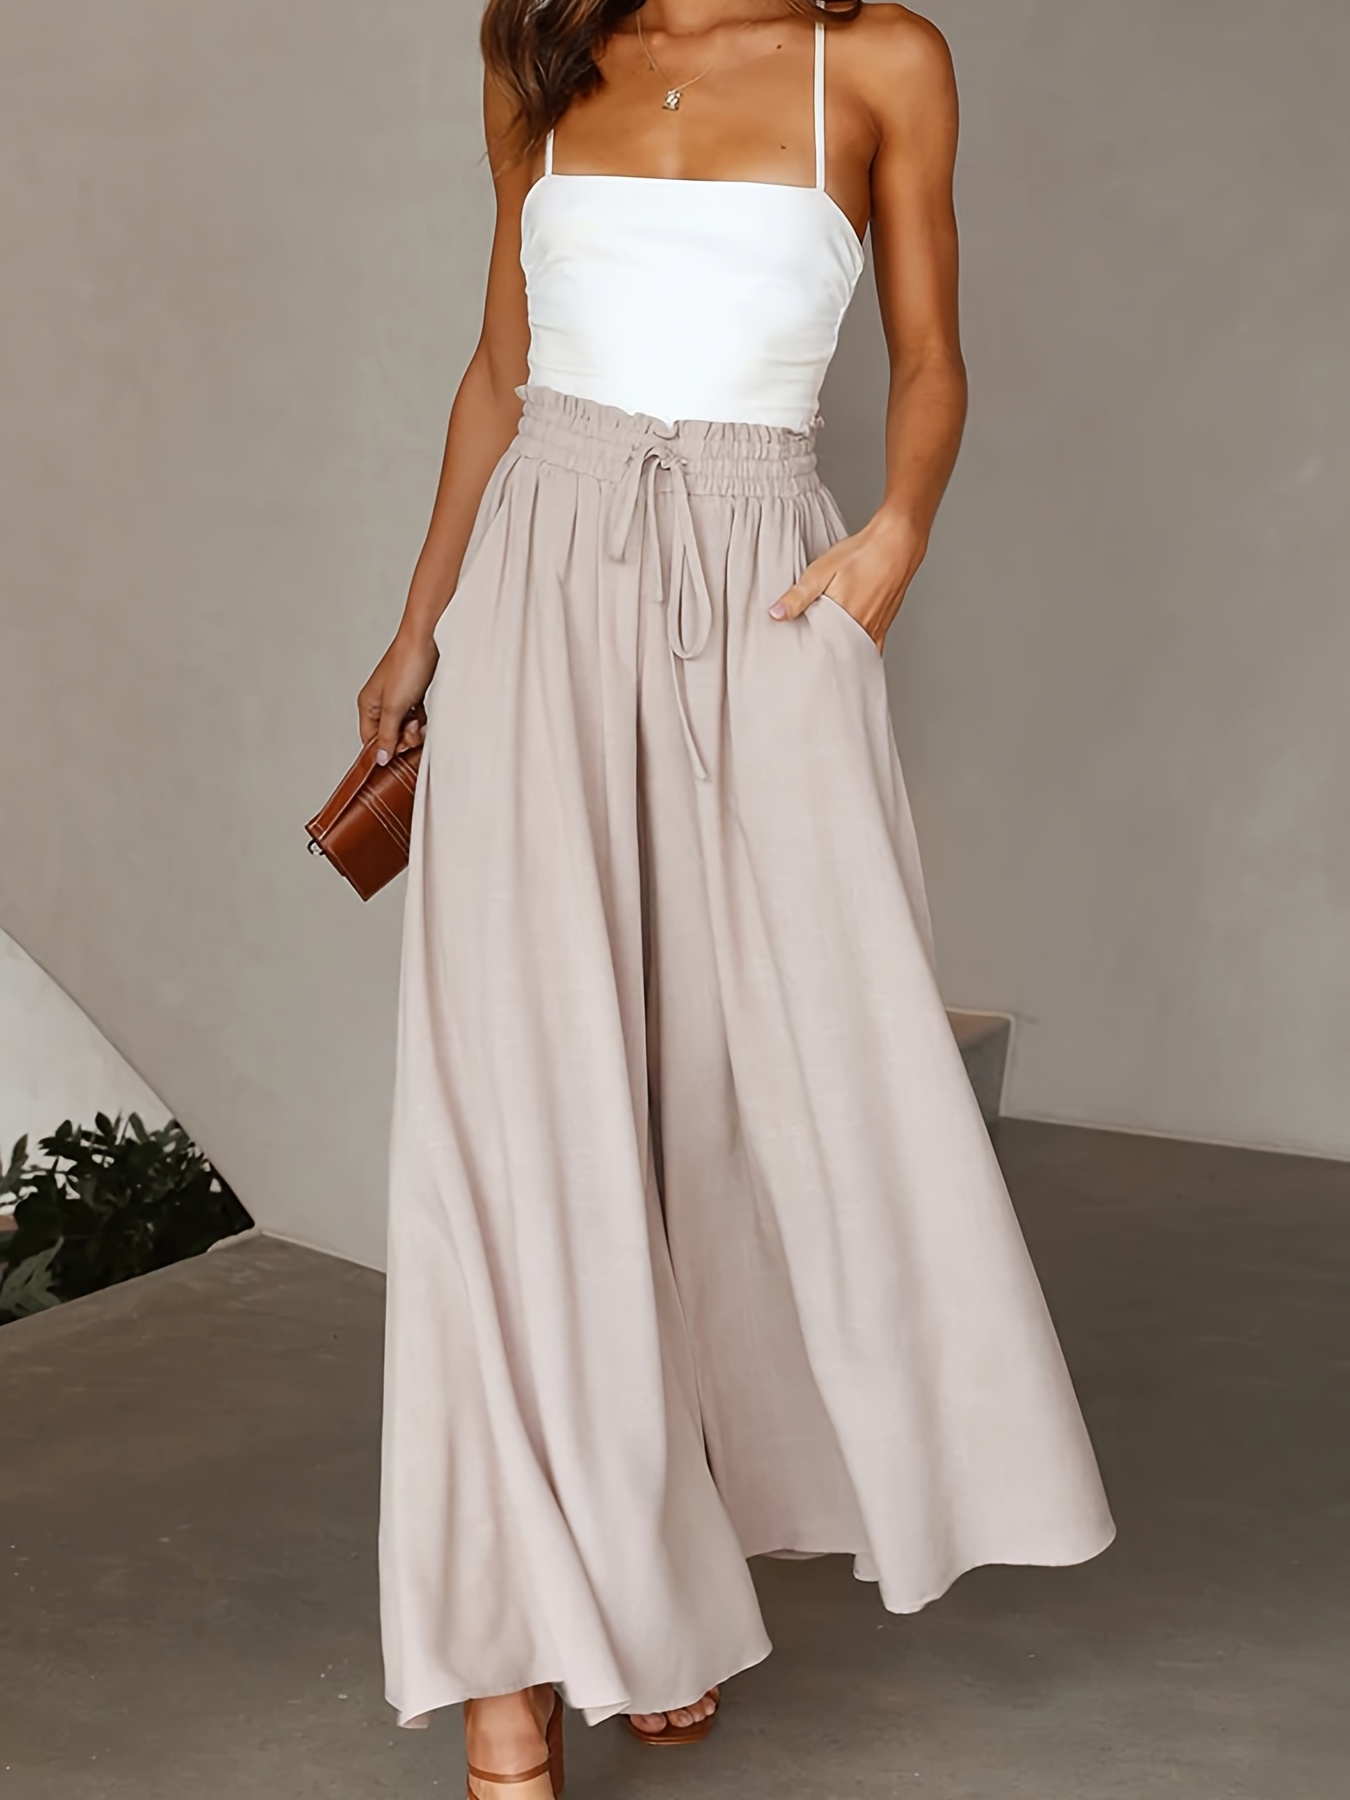 Women's Wide Leg Palazzo Pants with Pockets Light Weight Loose Comfortable  Casual Trousers Pants , White, XL